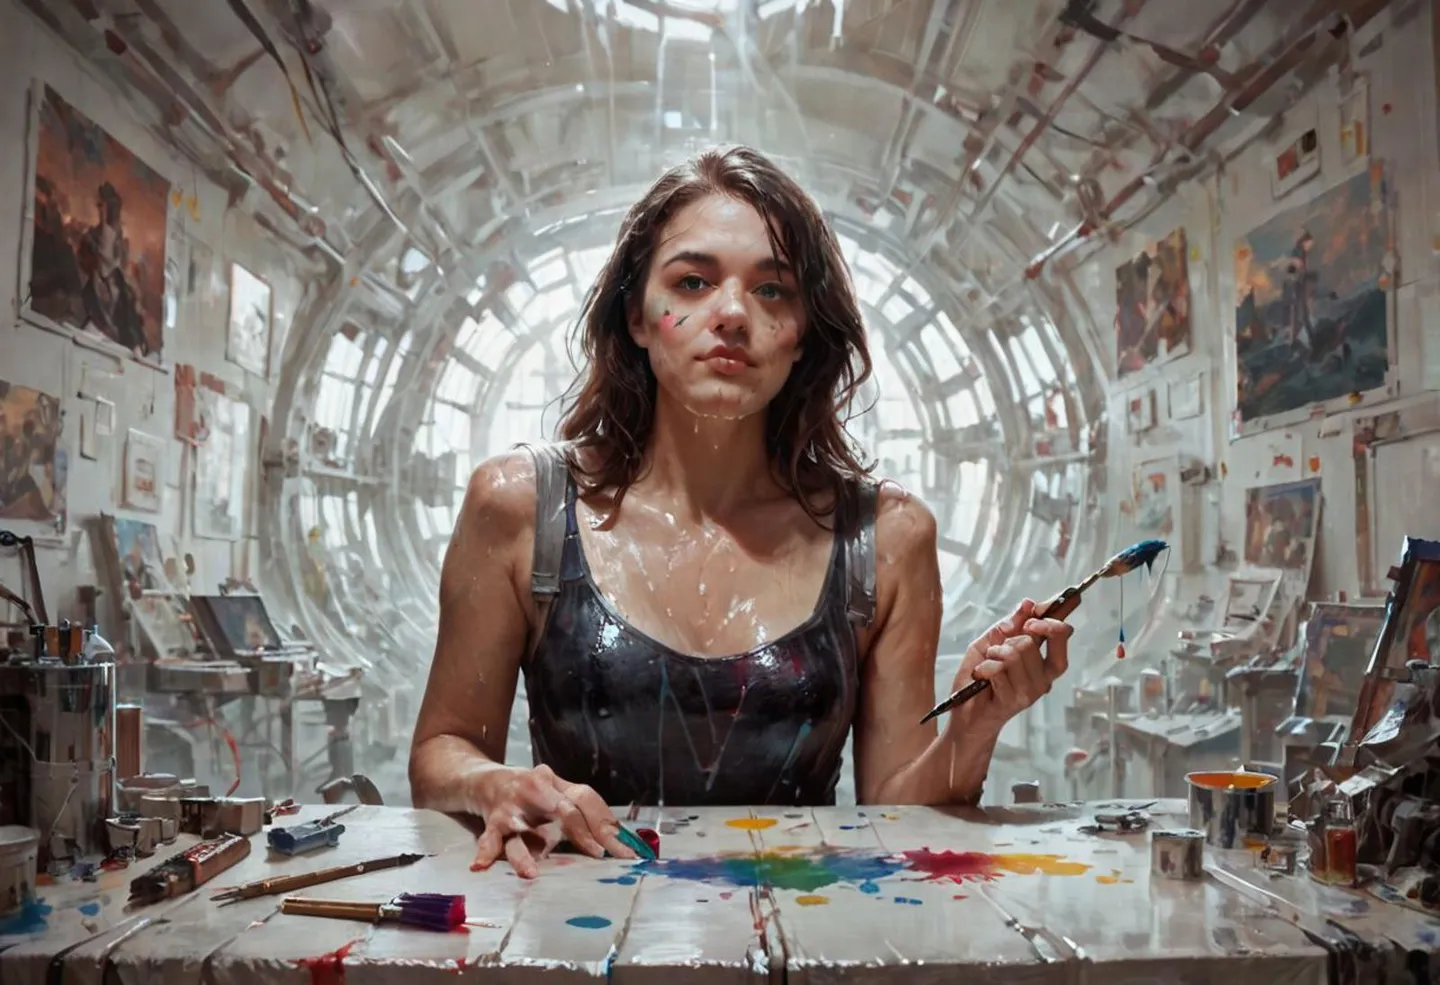 AI-generated image using Stable Diffusion of a female artist covered in paint, sitting at a table with brushes and splashes of color, within a futuristic, tunnel-like studio filled with artworks.